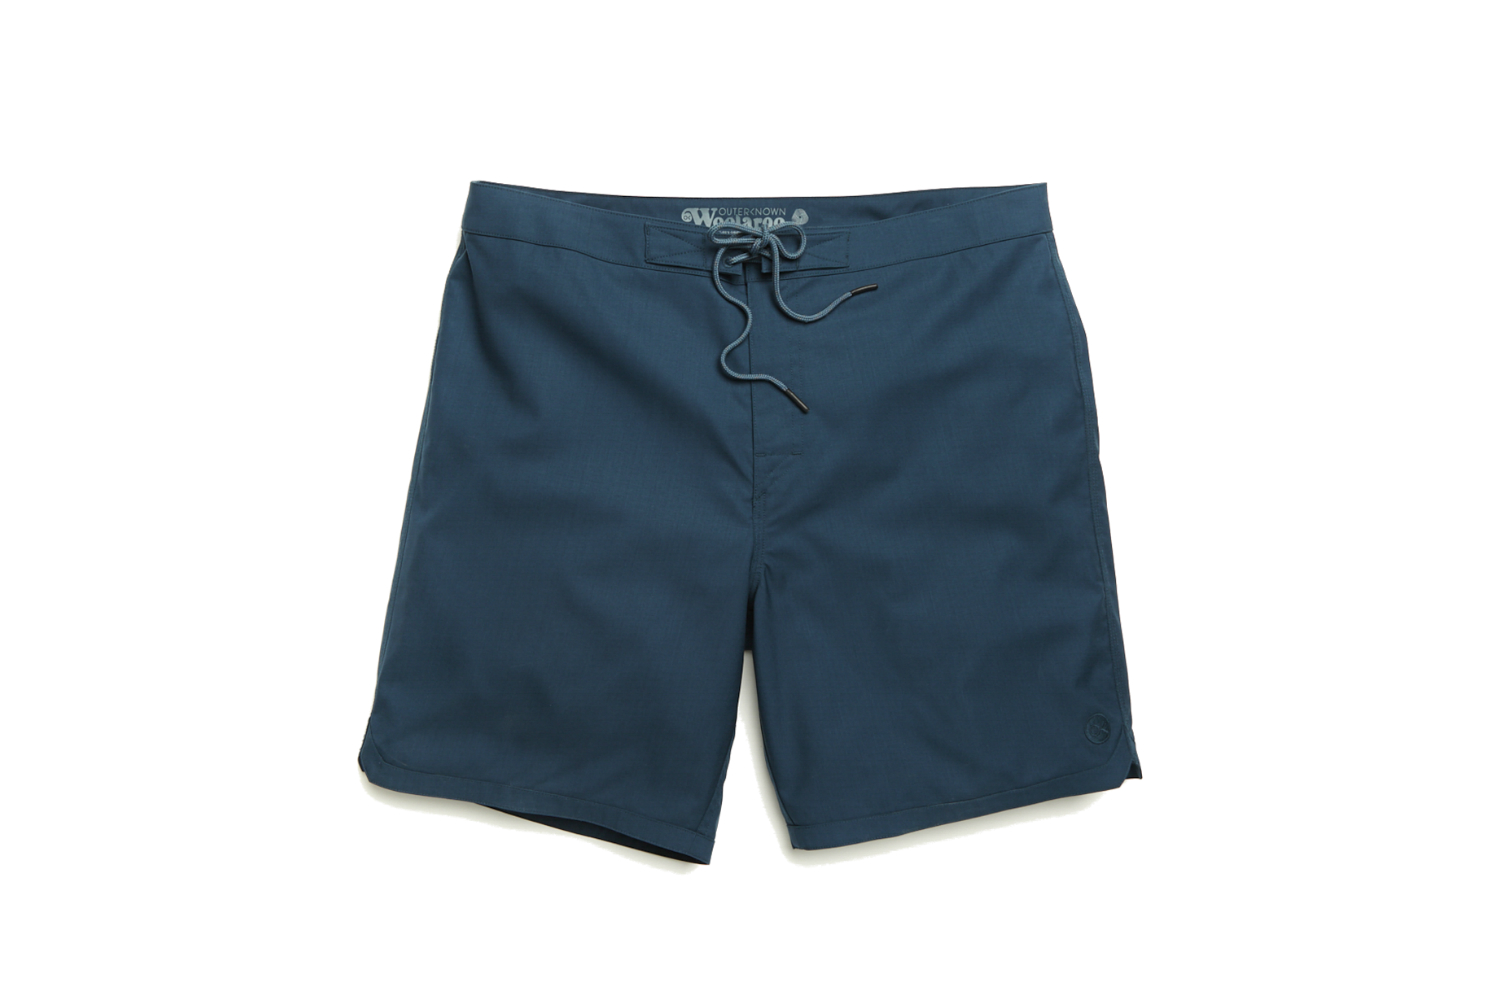 Outerknown is Throwing it Way Back with the Woolaroo Wool Swim Trunk ...